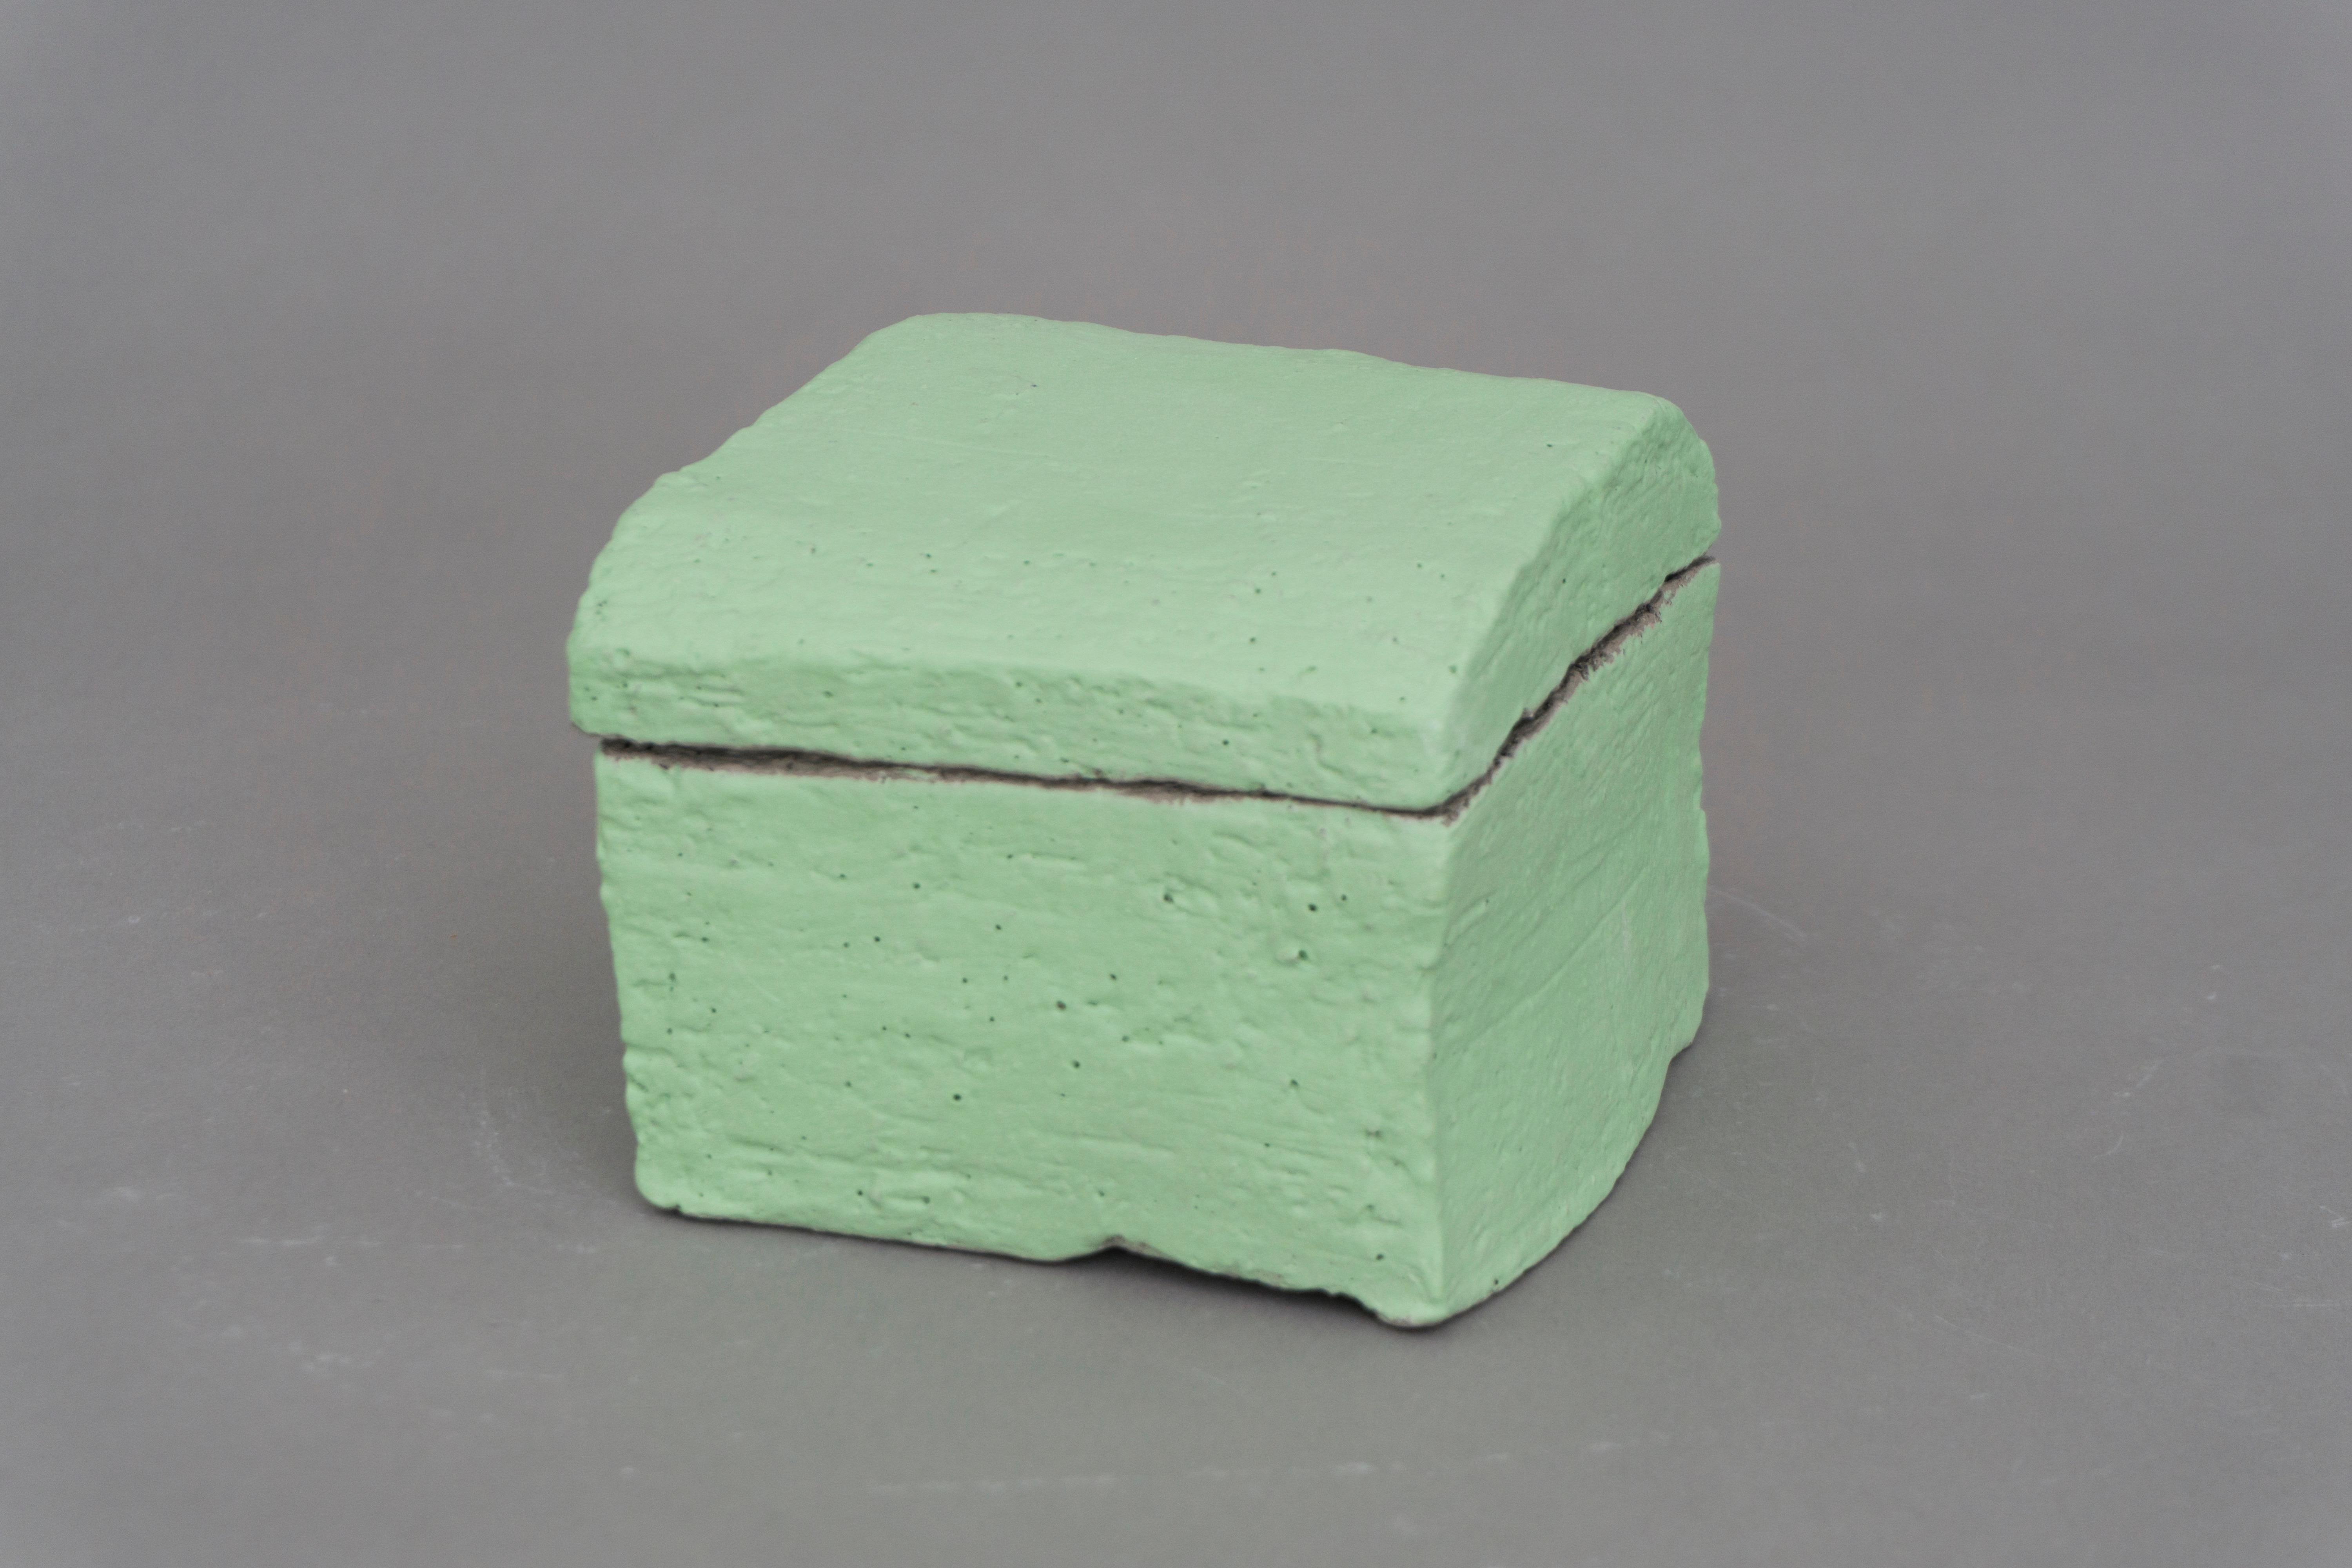 Unique square container by Christine Roland with a lid. Made of grey stoneware with a fresh pale green engobe by designer Christine Roland. Matt finish and a heavy feel. Store your precious items!

'Christine Roland is a Berlin-based, Danish